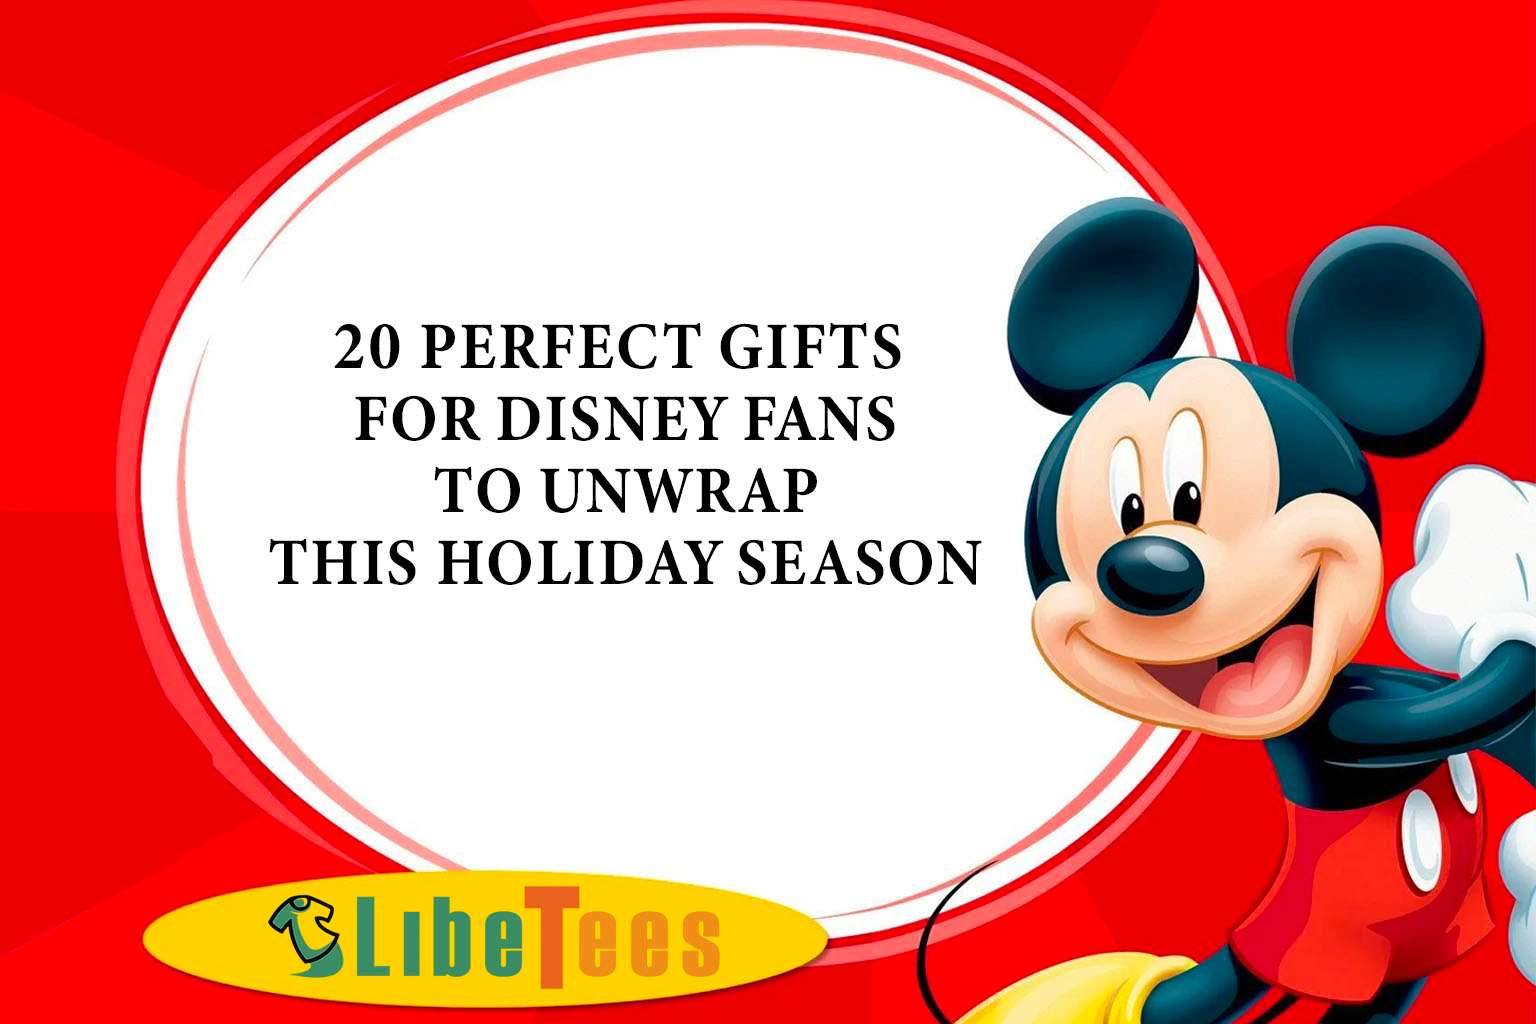 20 Perfect Gifts For Disney Fans To Unwrap This Holiday Season